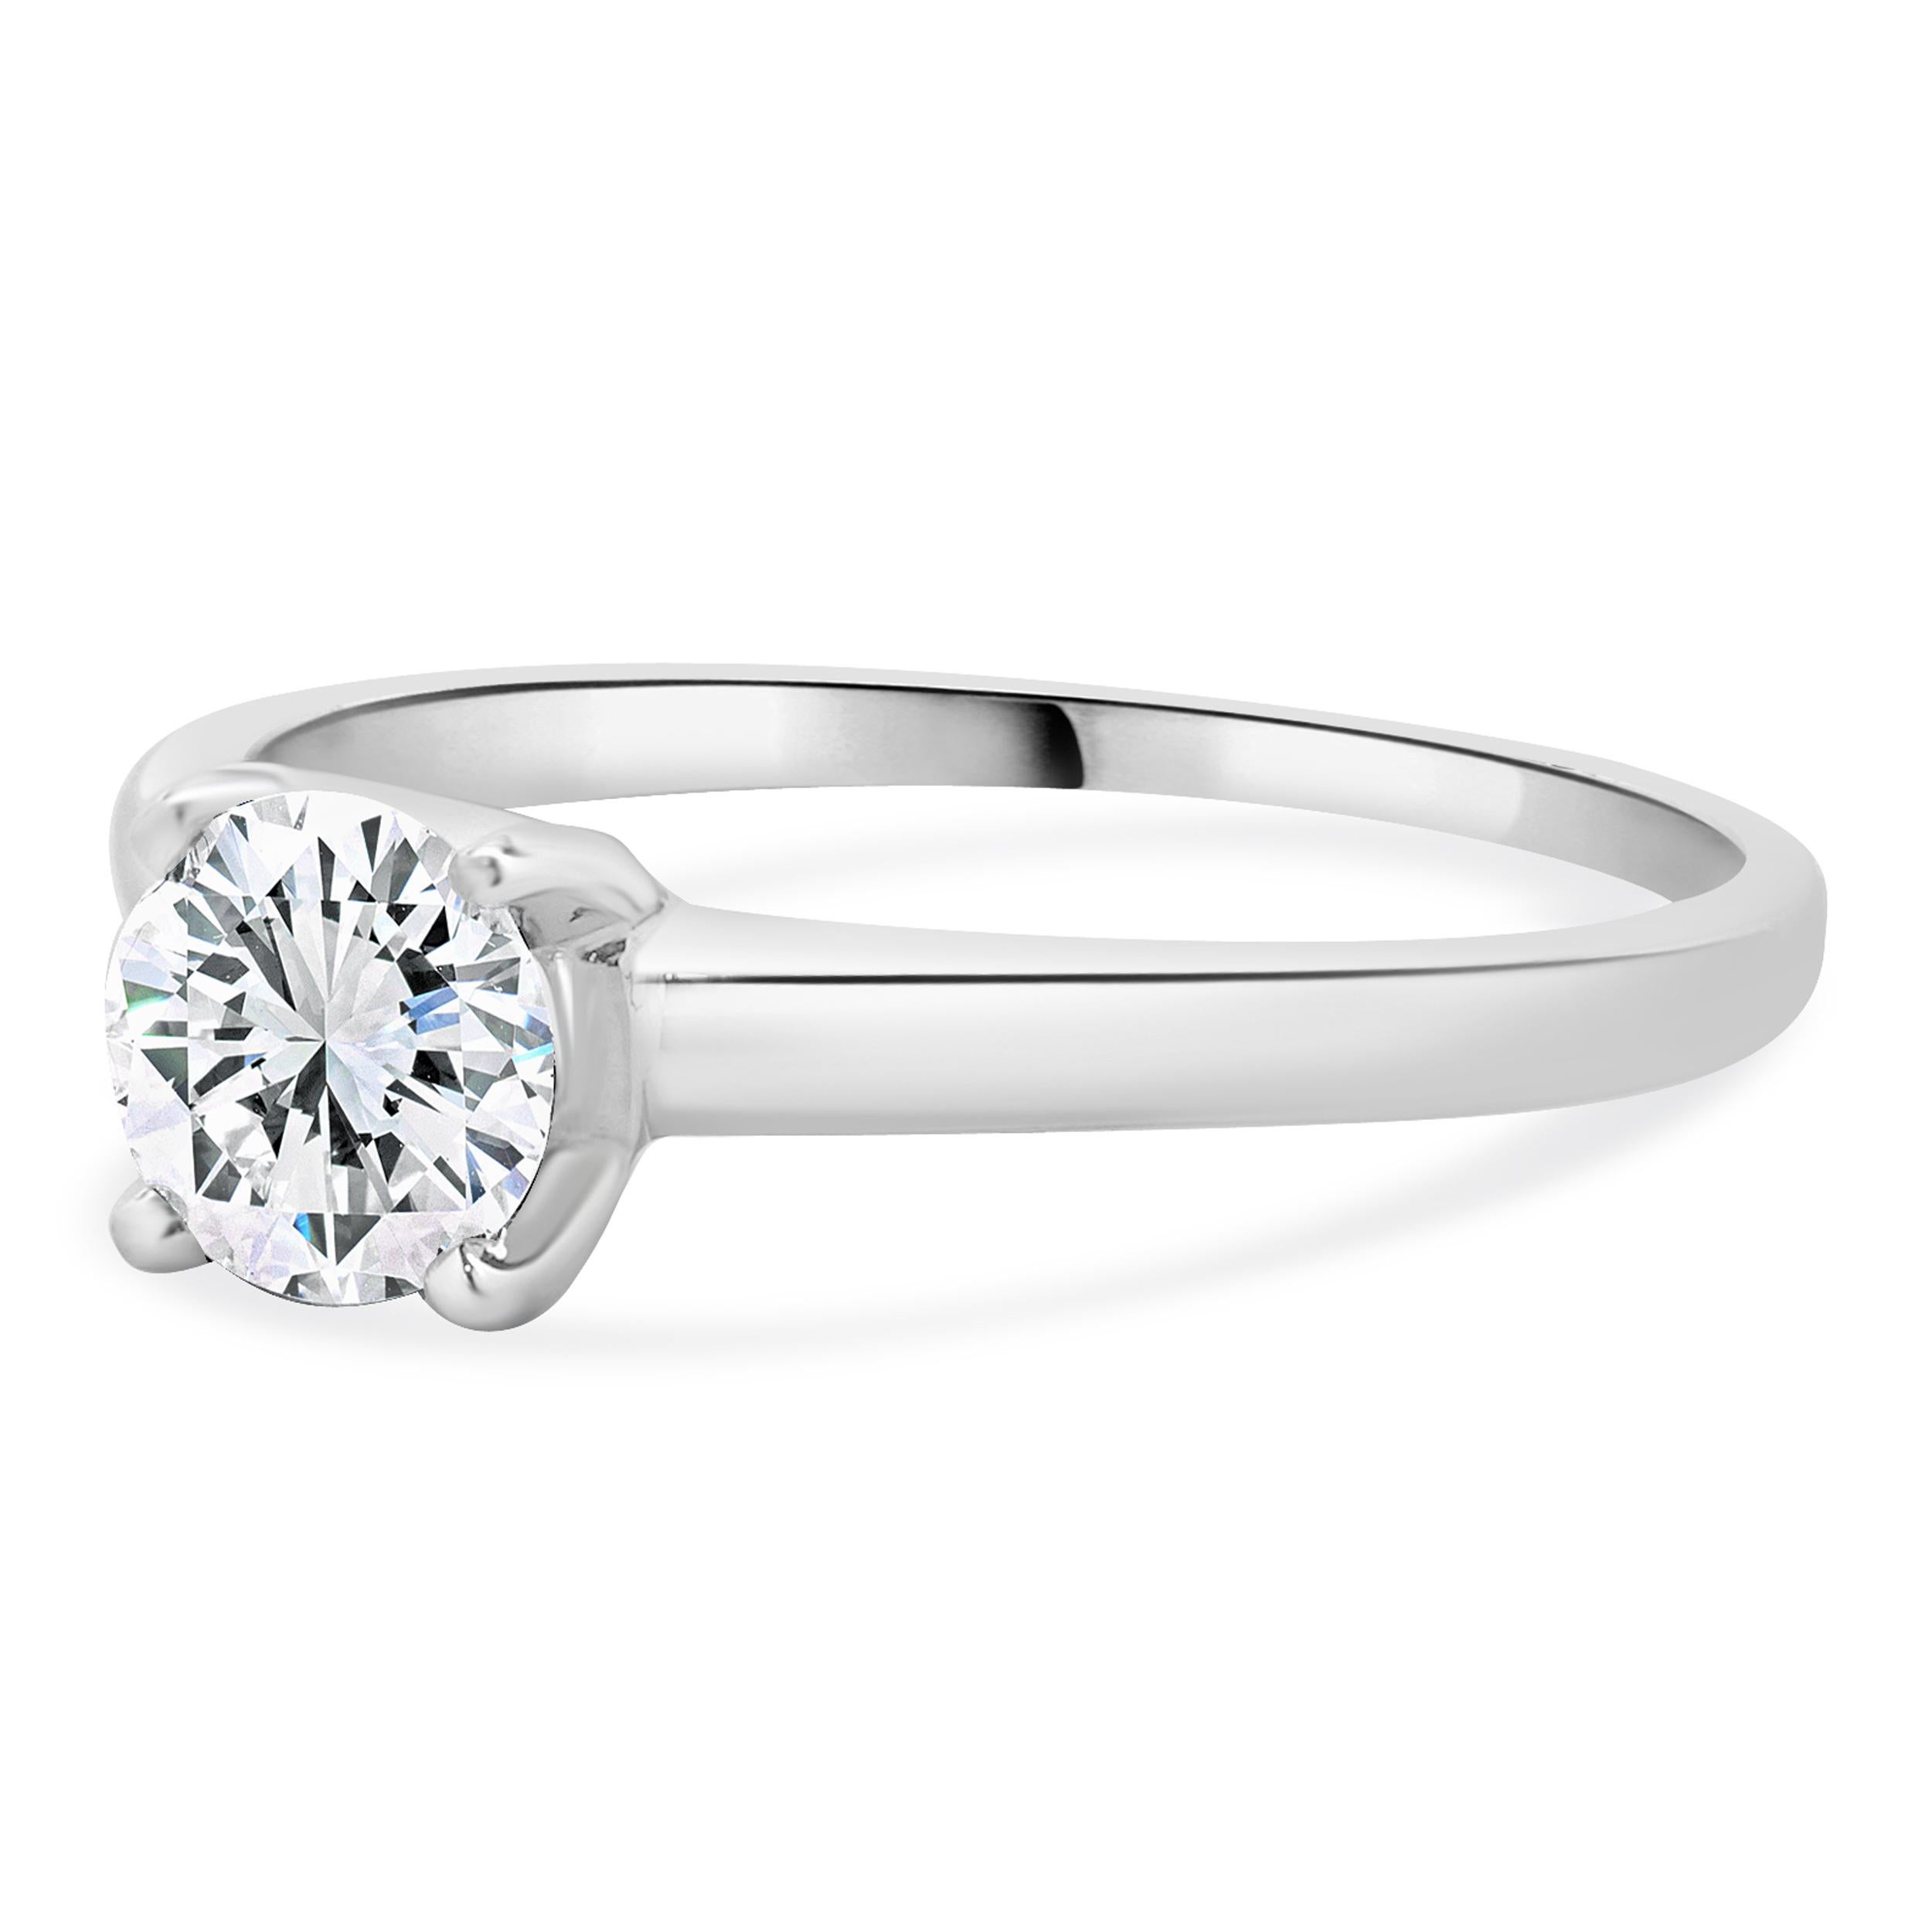 Designer: custom
Material: 14K white gold
Center Diamond: 1 round brilliant cut = 0.75ct
Color : G
Clarity : SI1
Size: 8.5 complimentary sizing available 
Weight: 2.59 grams
